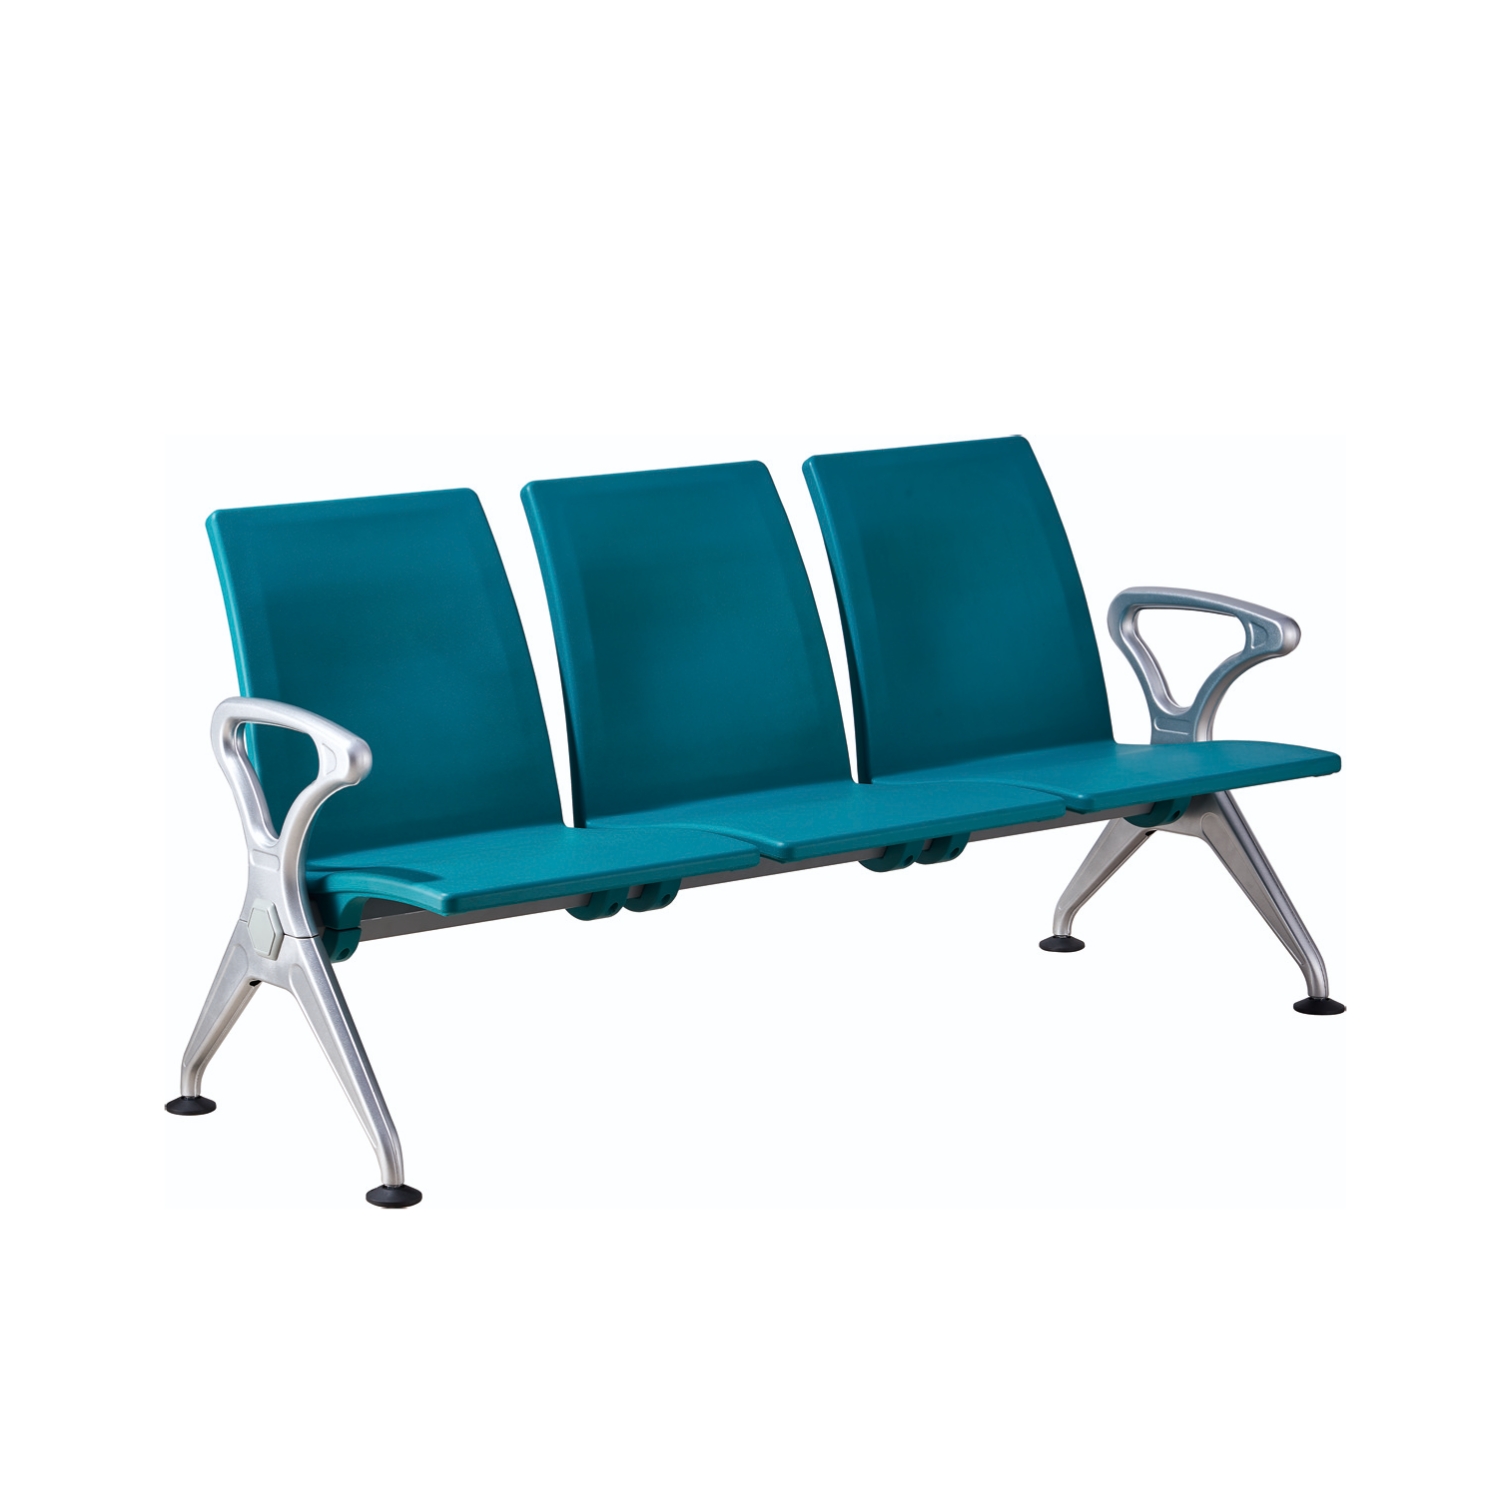 Three seaters waiting chair airport hospital lounge bench iron leg station Pu row Link Chairs Seating Waiting Chair